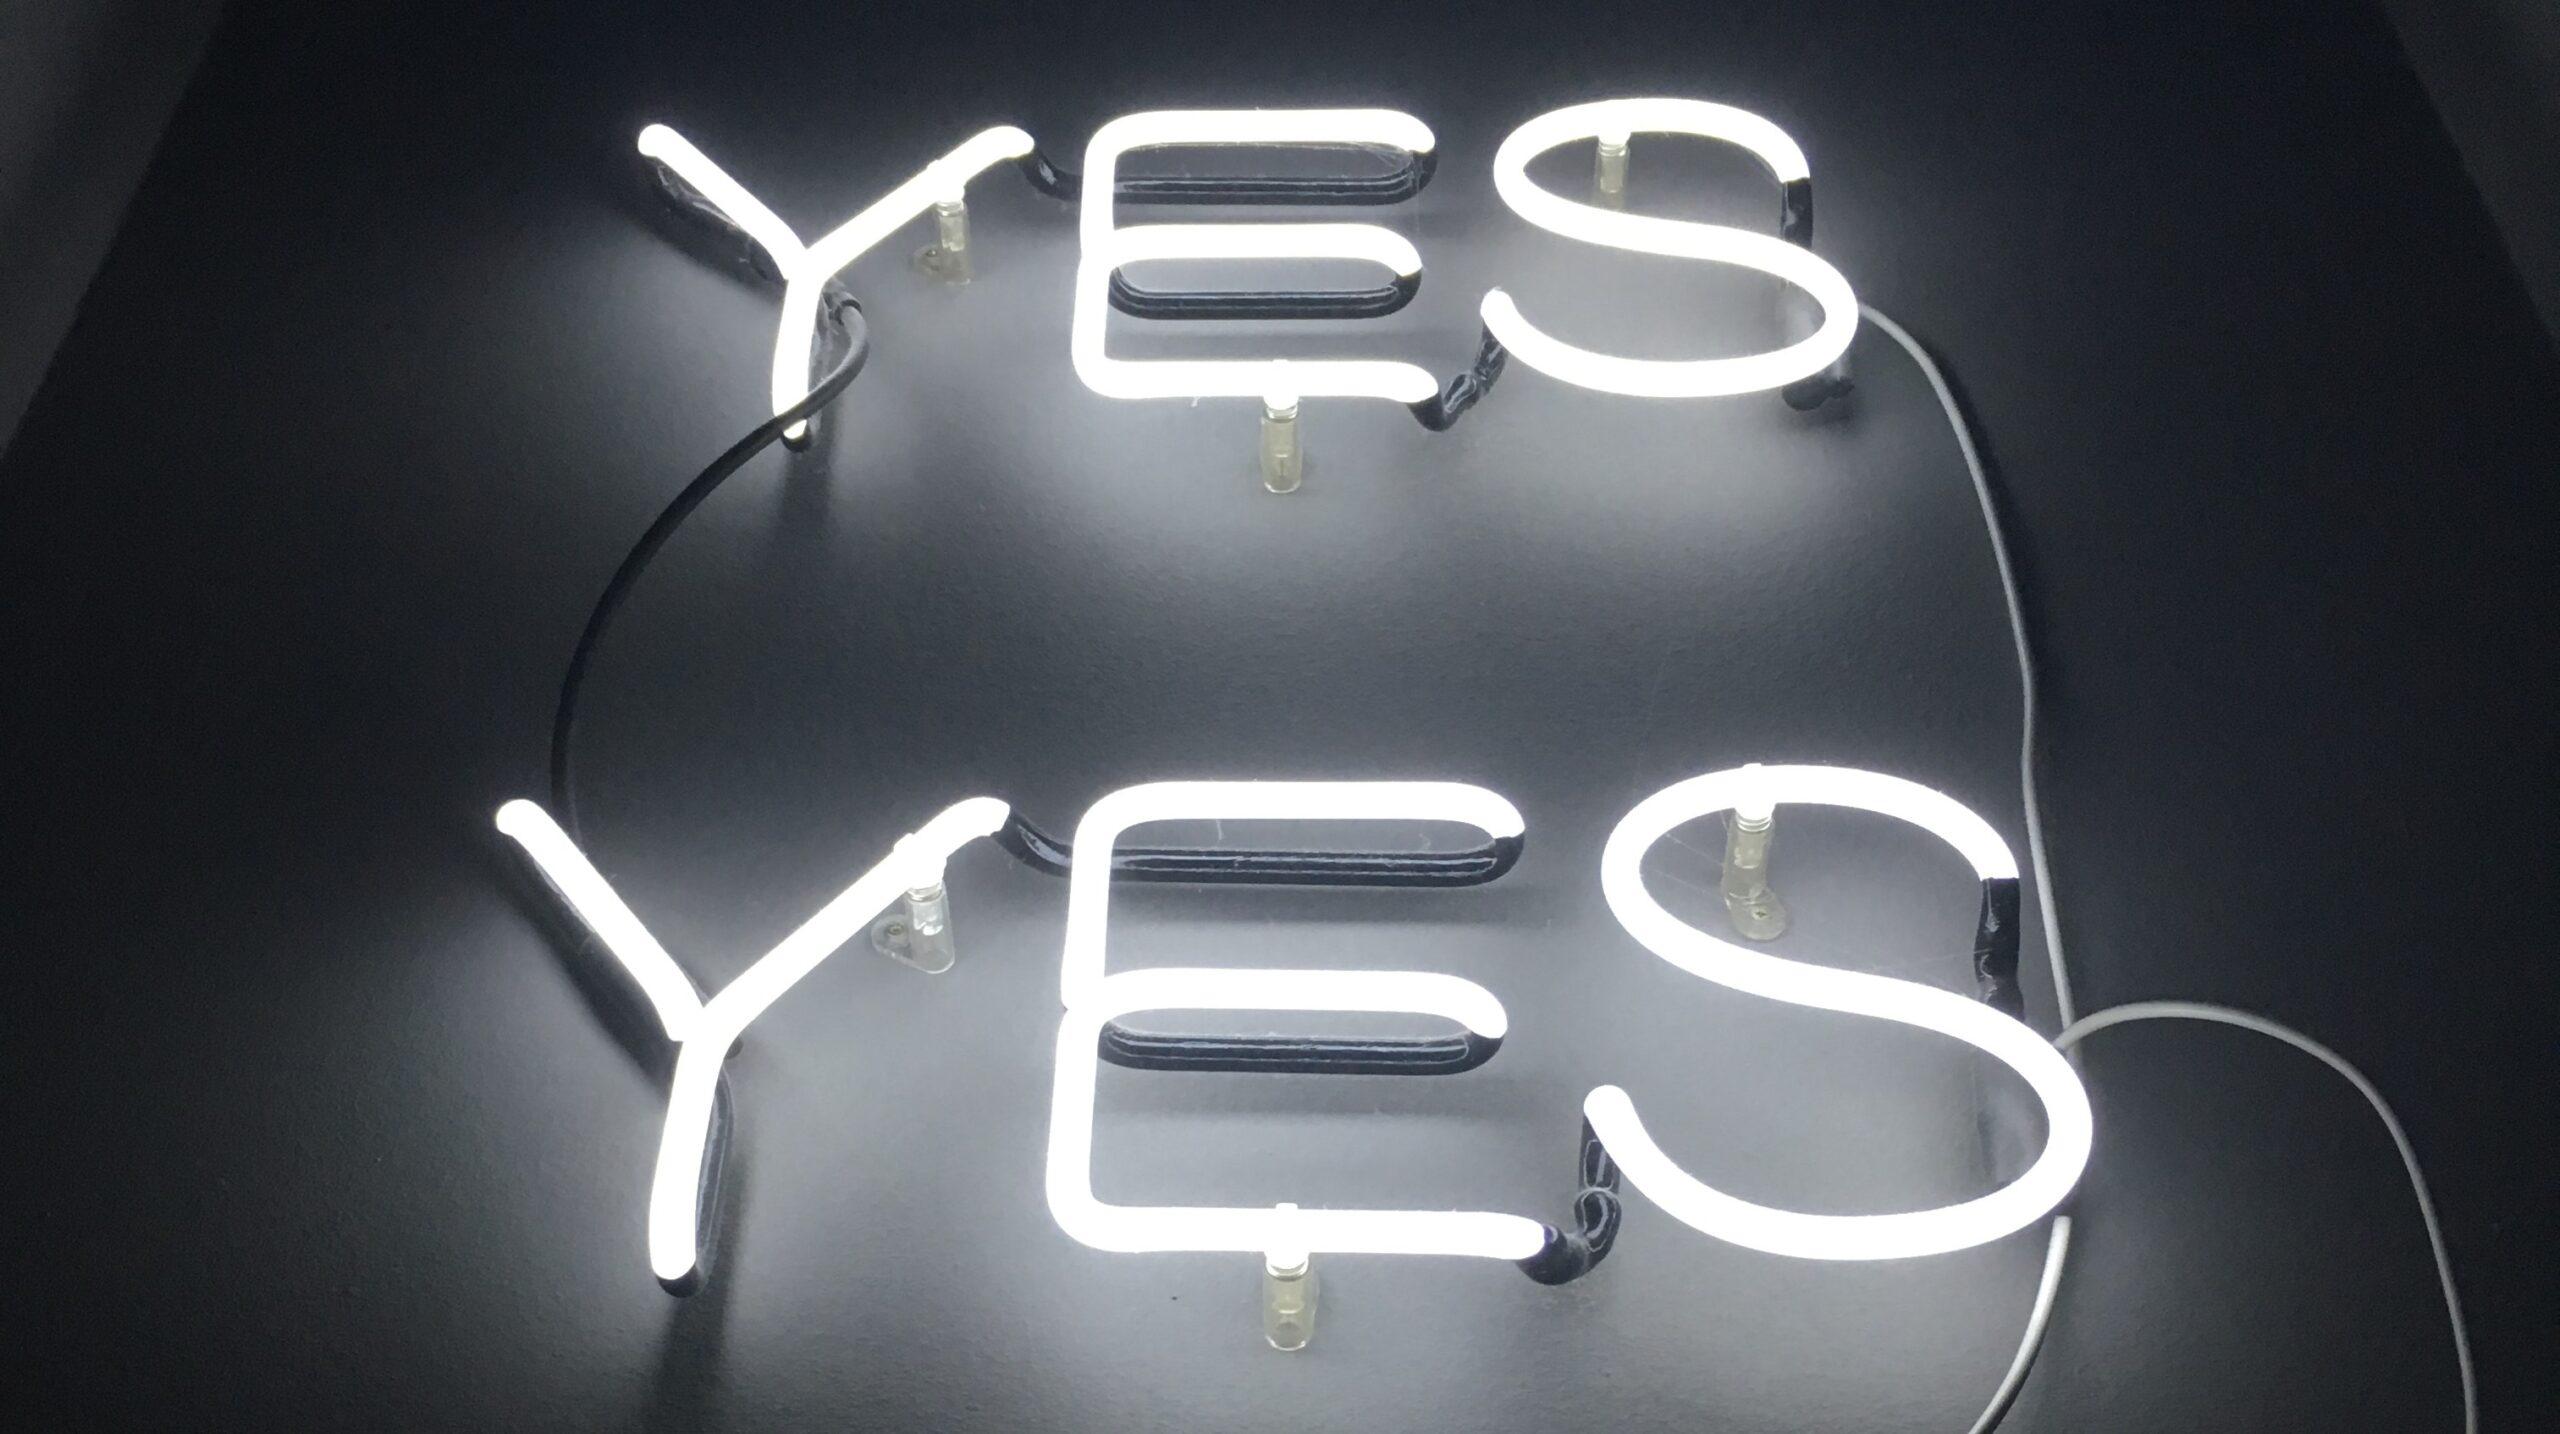 Illuminated sign spelling out the word 'yes' twice.